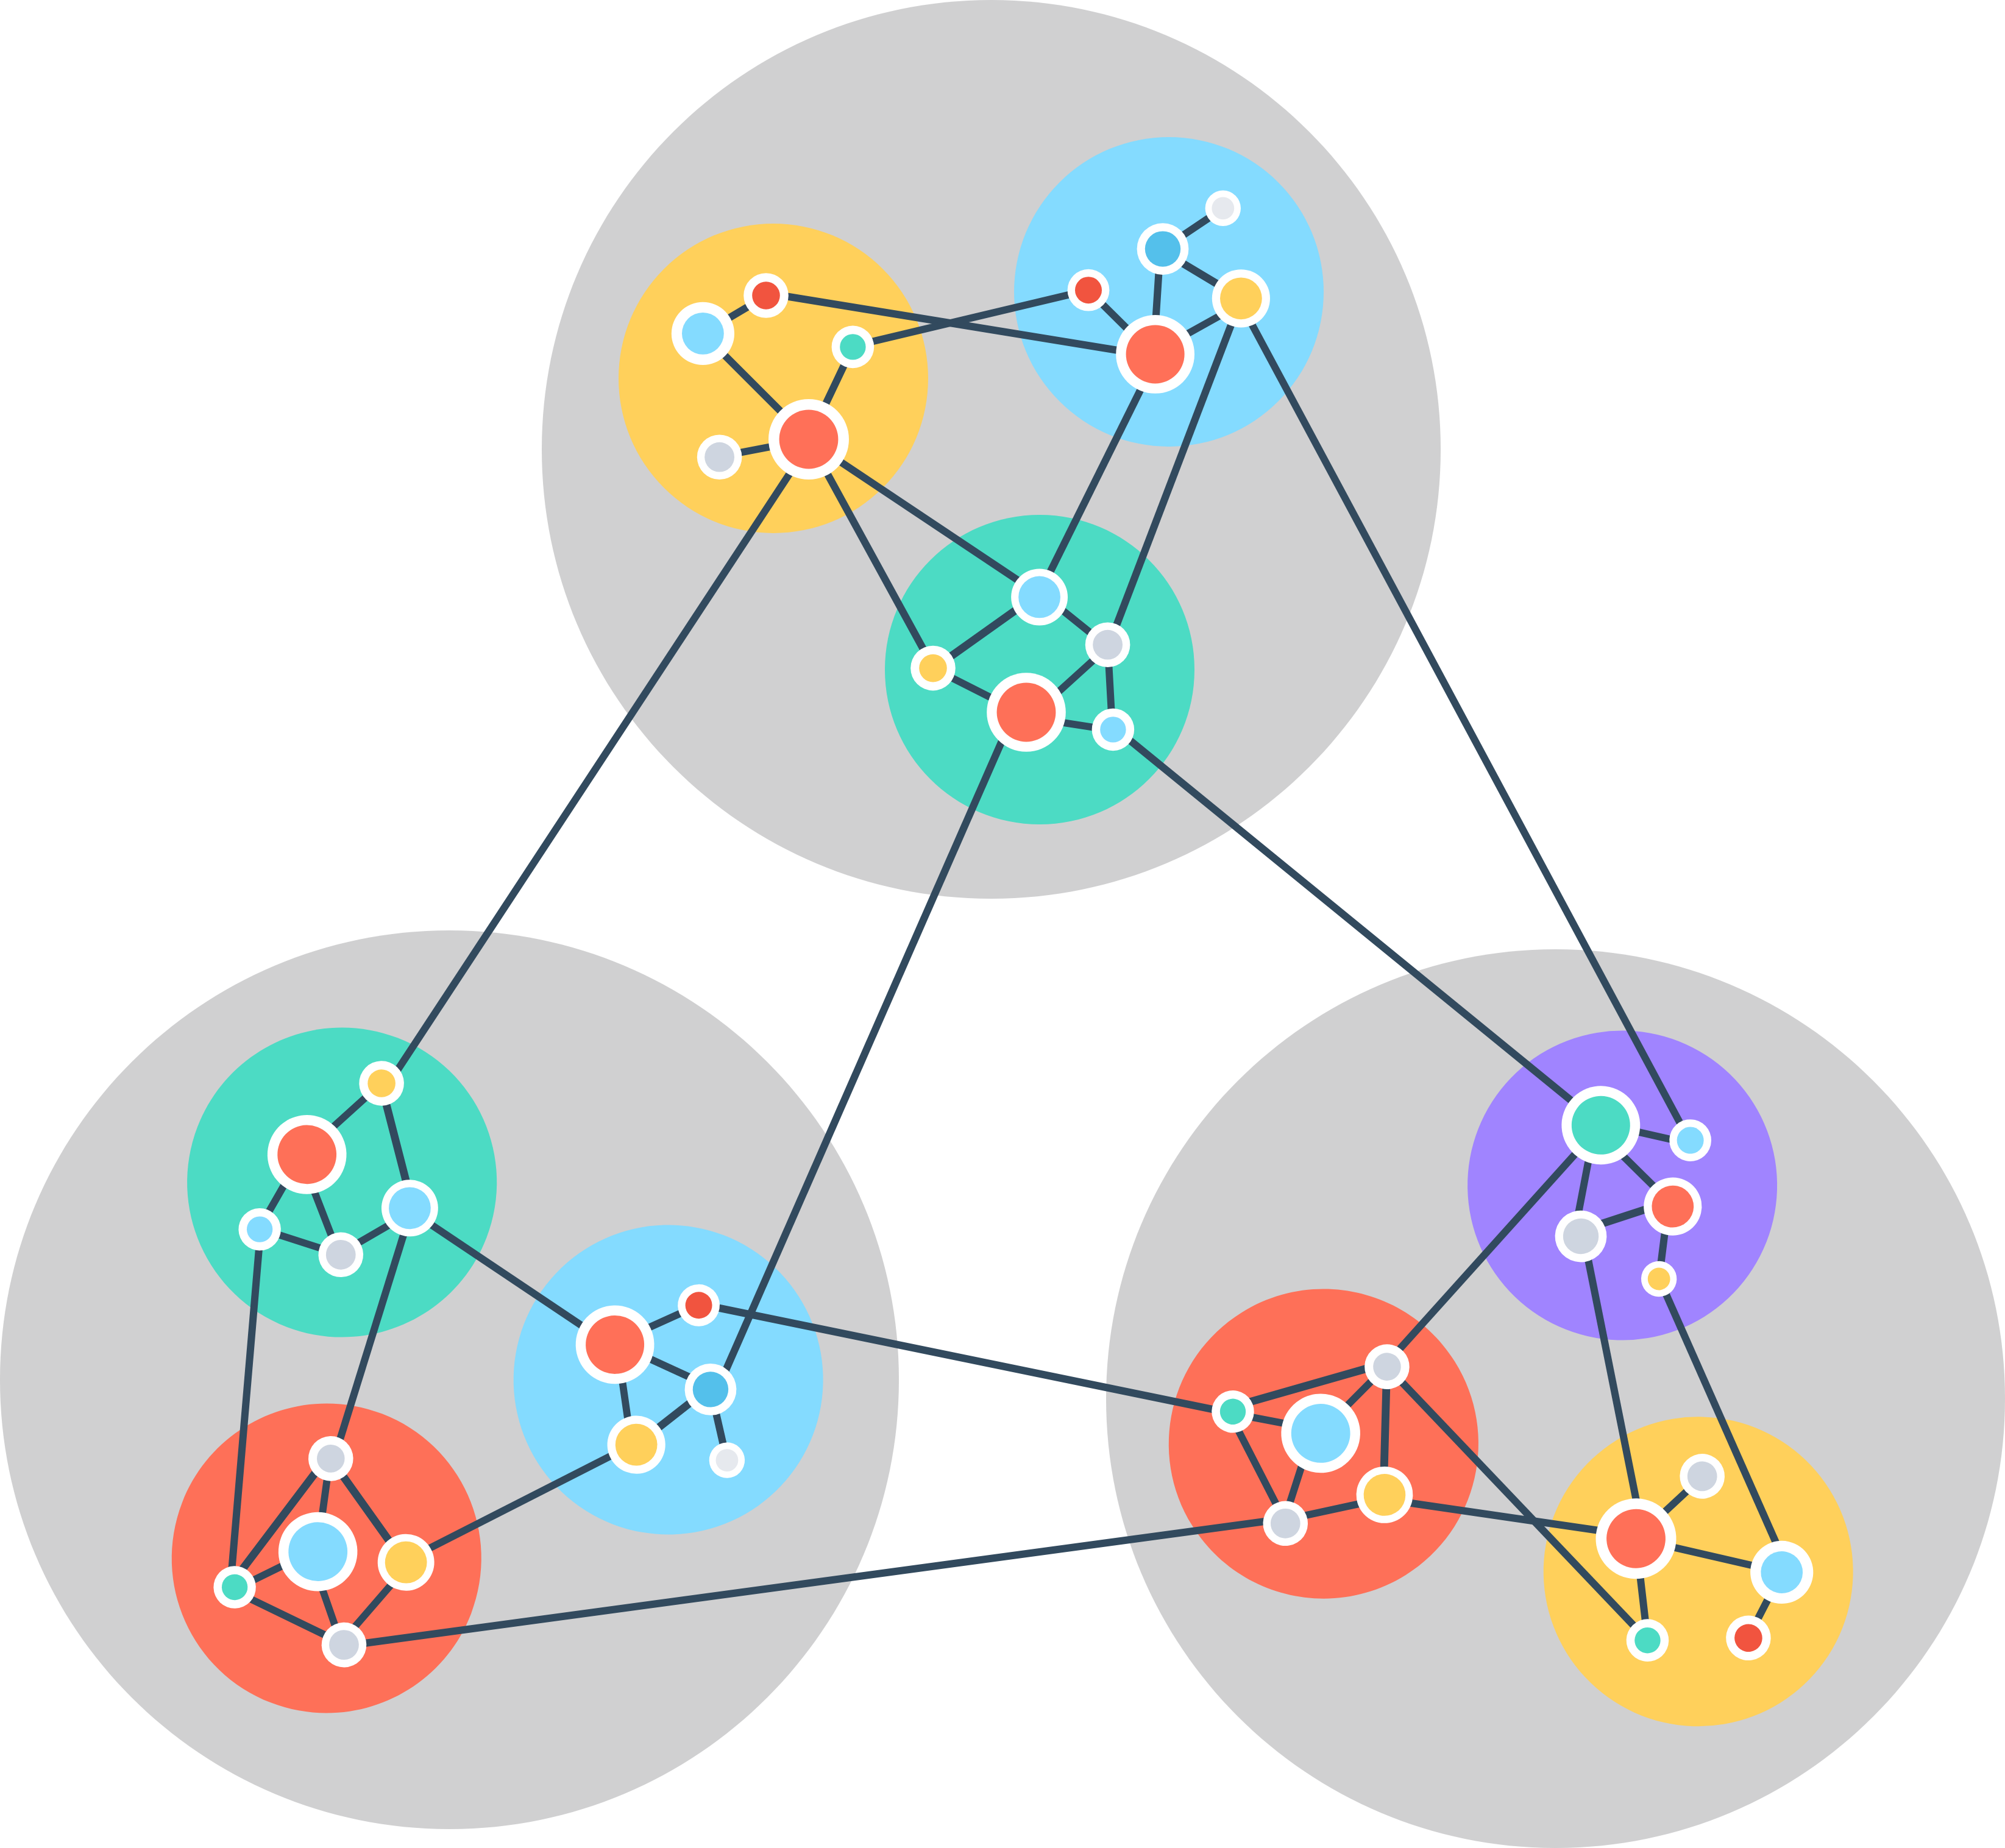 Diagram of many interconnected clusters of nodes